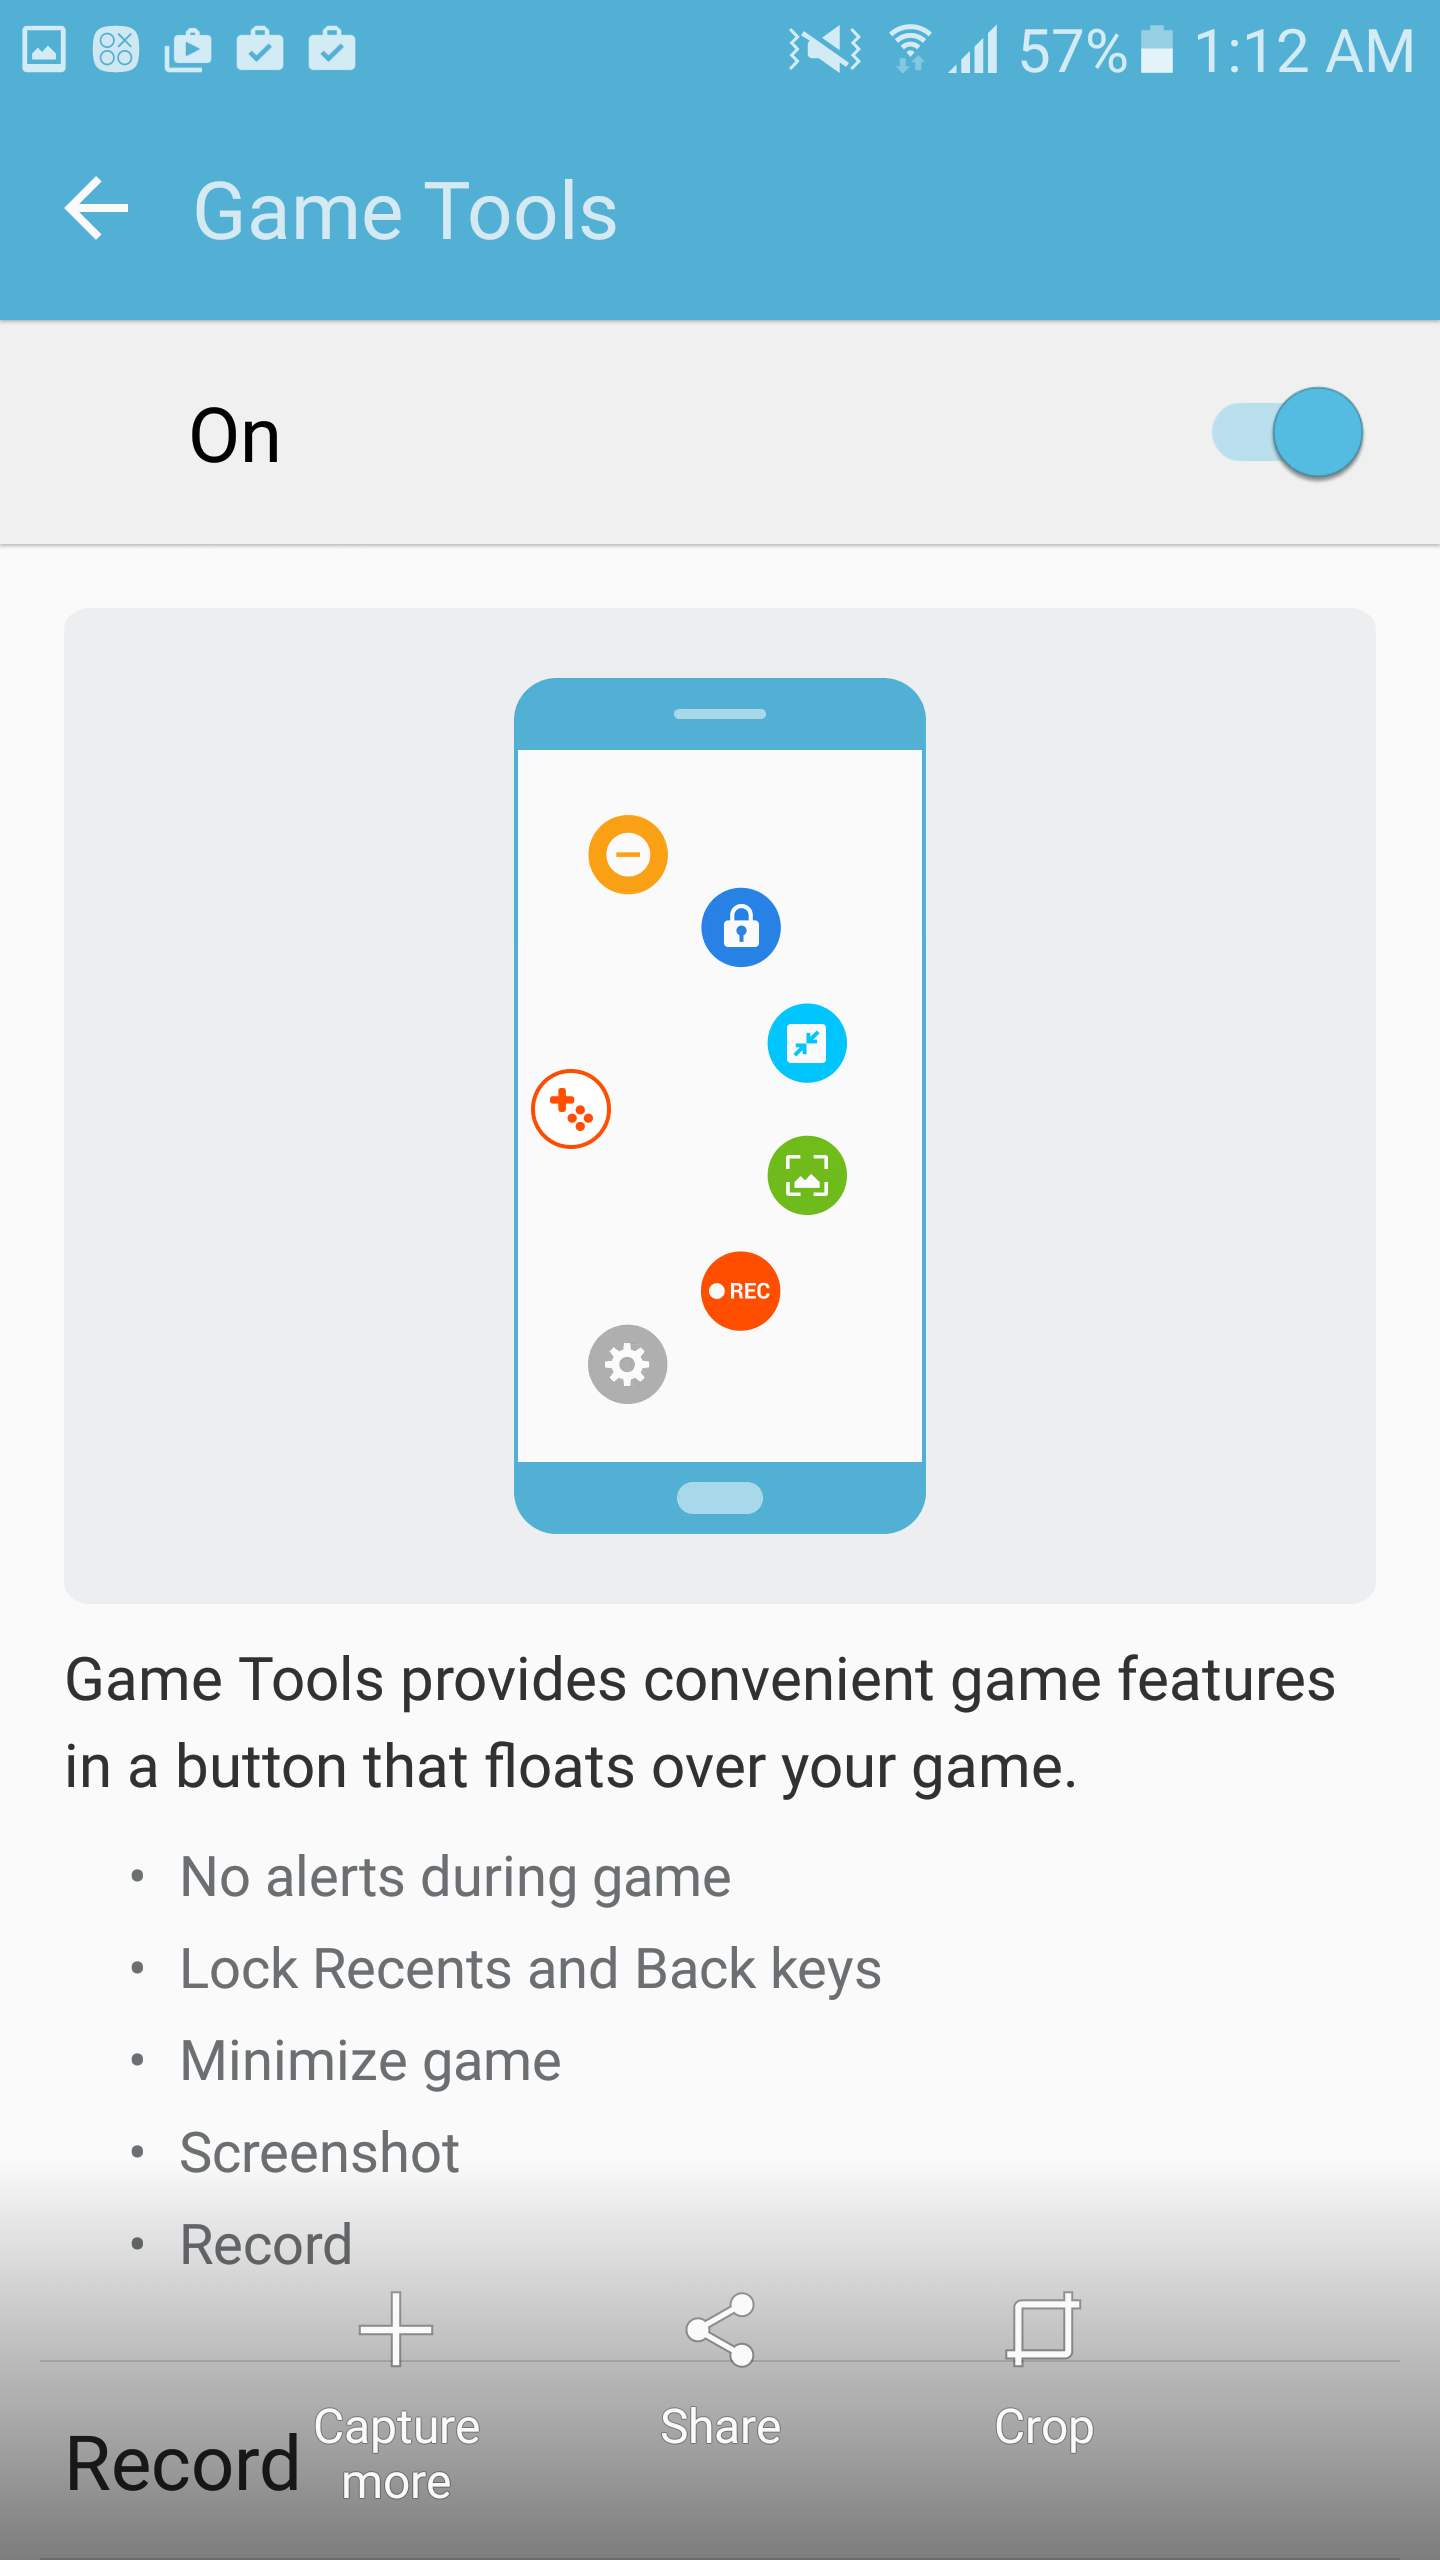 You can now use these goodies with non-gaming apps, too - How to use any app on your Samsung phone with Game Tools (record, minimize, mute notifications)